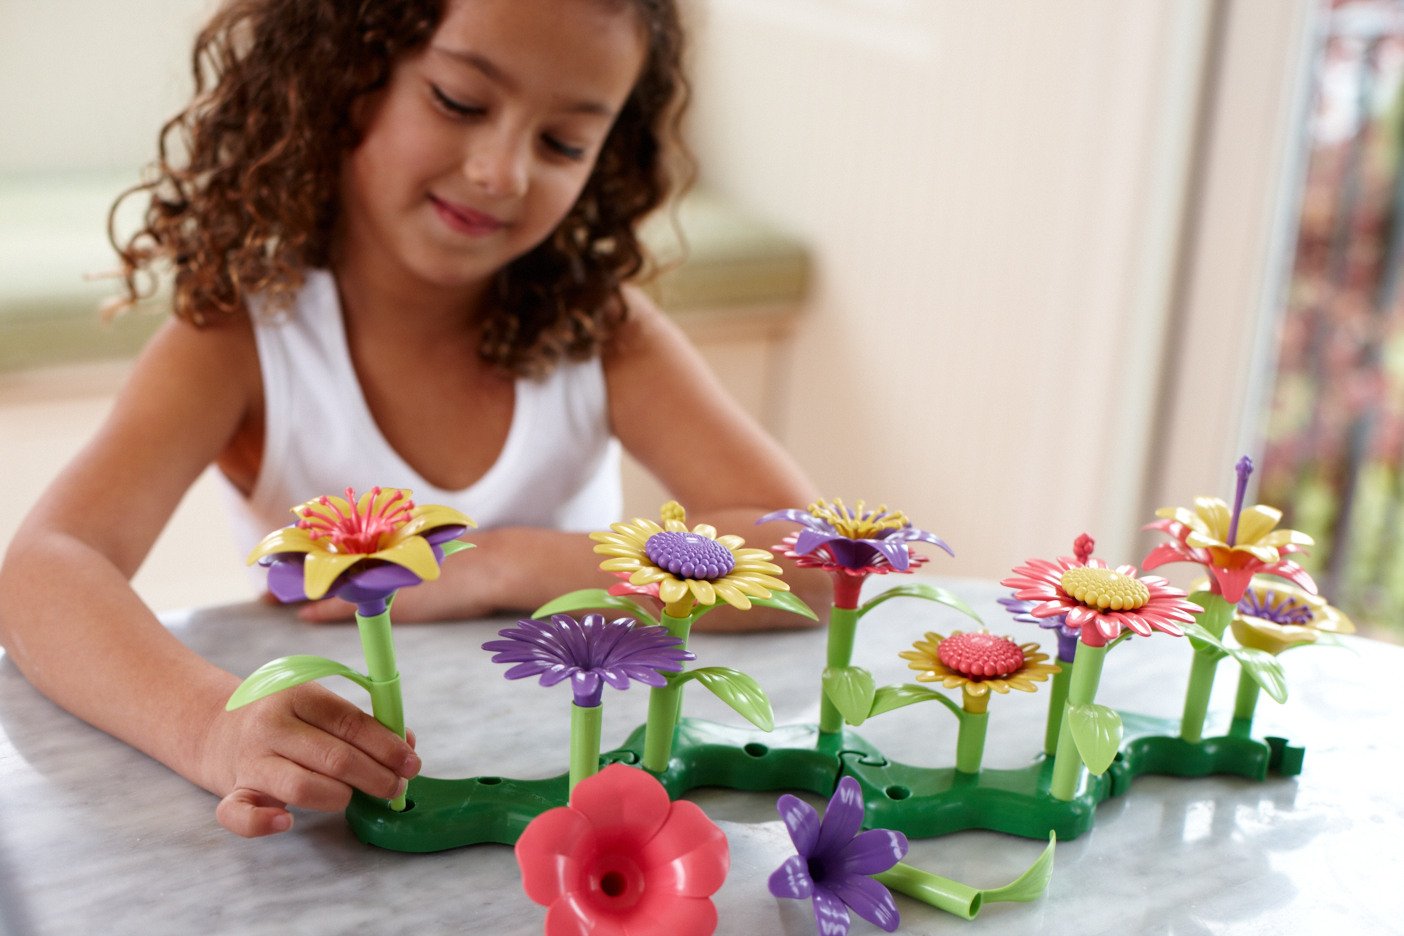 Green Toys Build-a-Bouquet Floral Arrangement Playset - BPA Free, Phthalates Free, Creative Play Toys for Gross Motors, Fine Motor Skill Development. Toys and Games